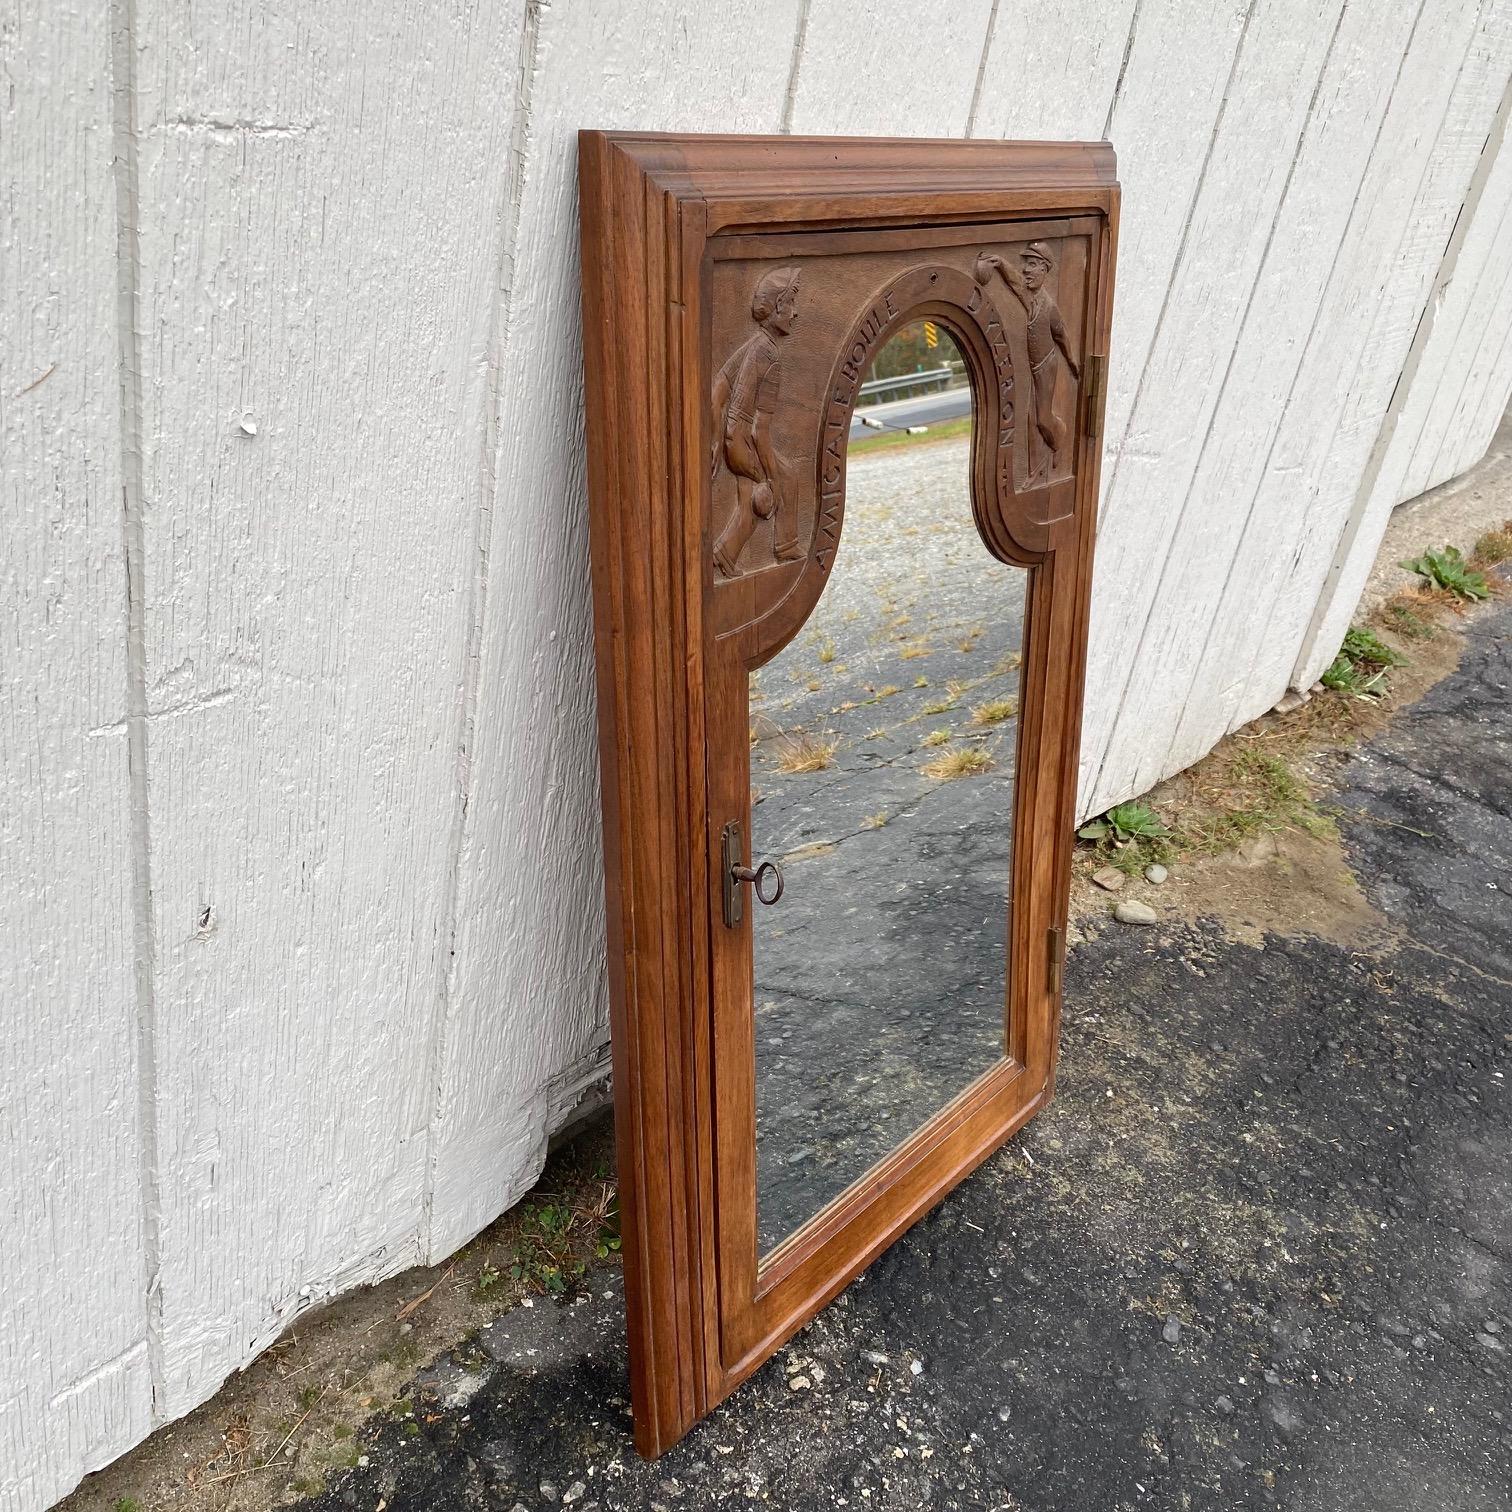 From France, fabulous and unusual mirror made from a carved walnut boule tournament score board cabinet. Translates to: 